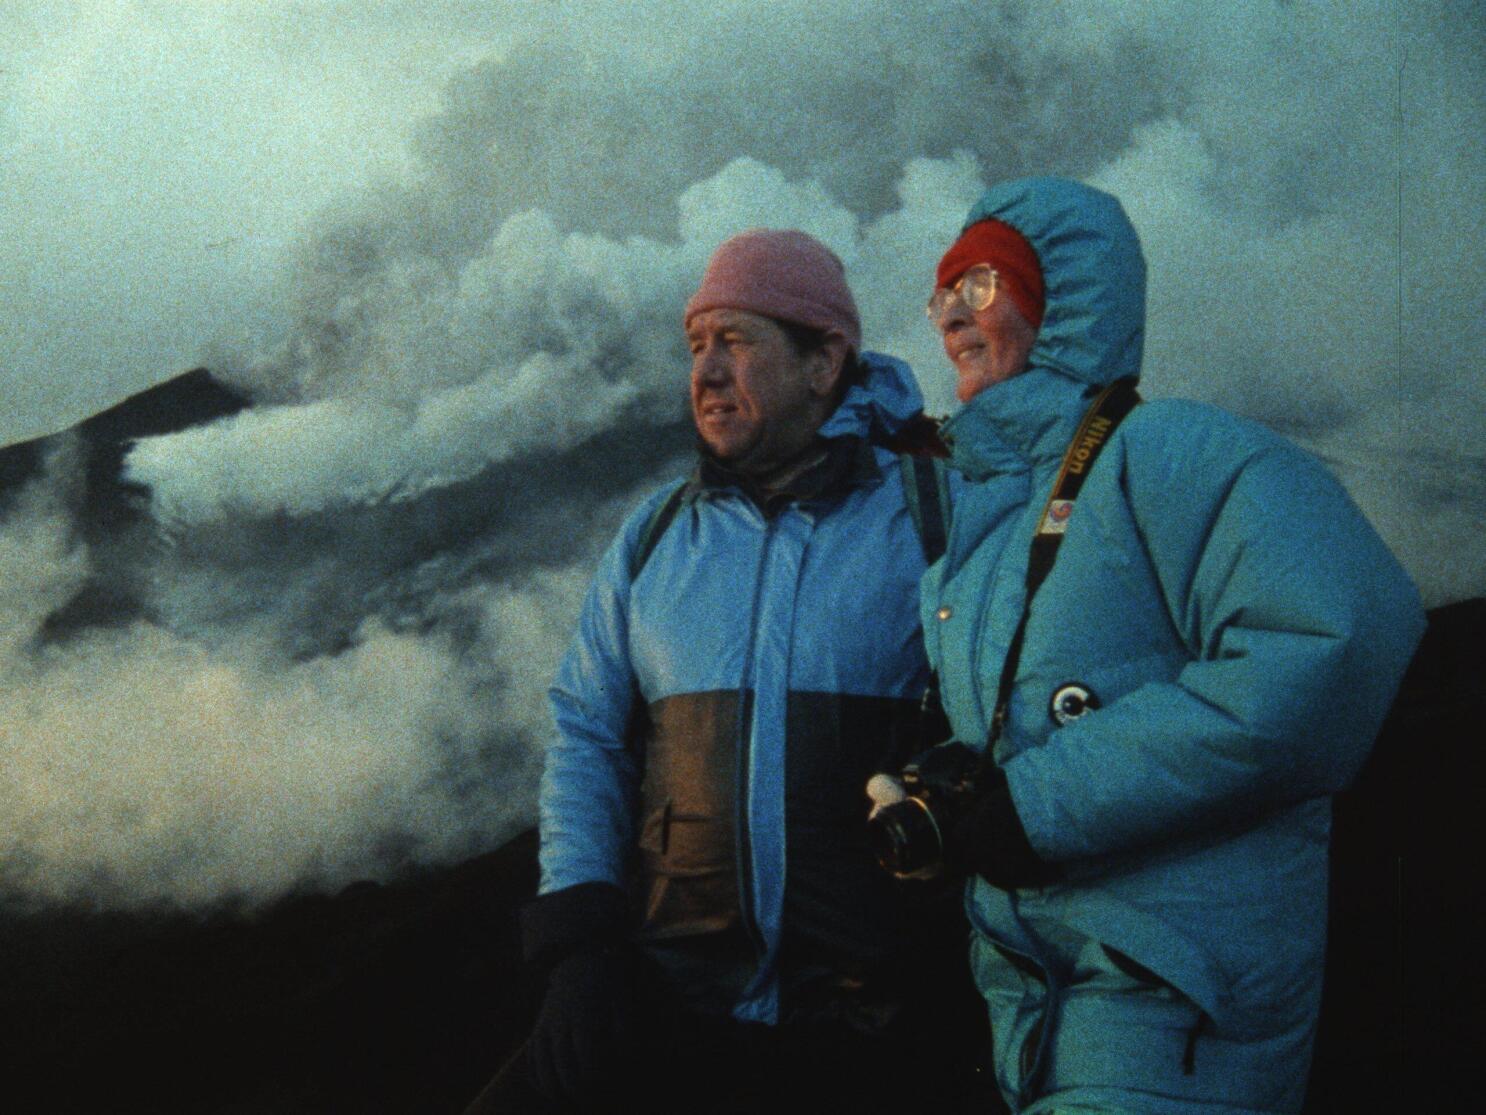 A celebrity volcanologist couple spotlighted in new doc | AP News